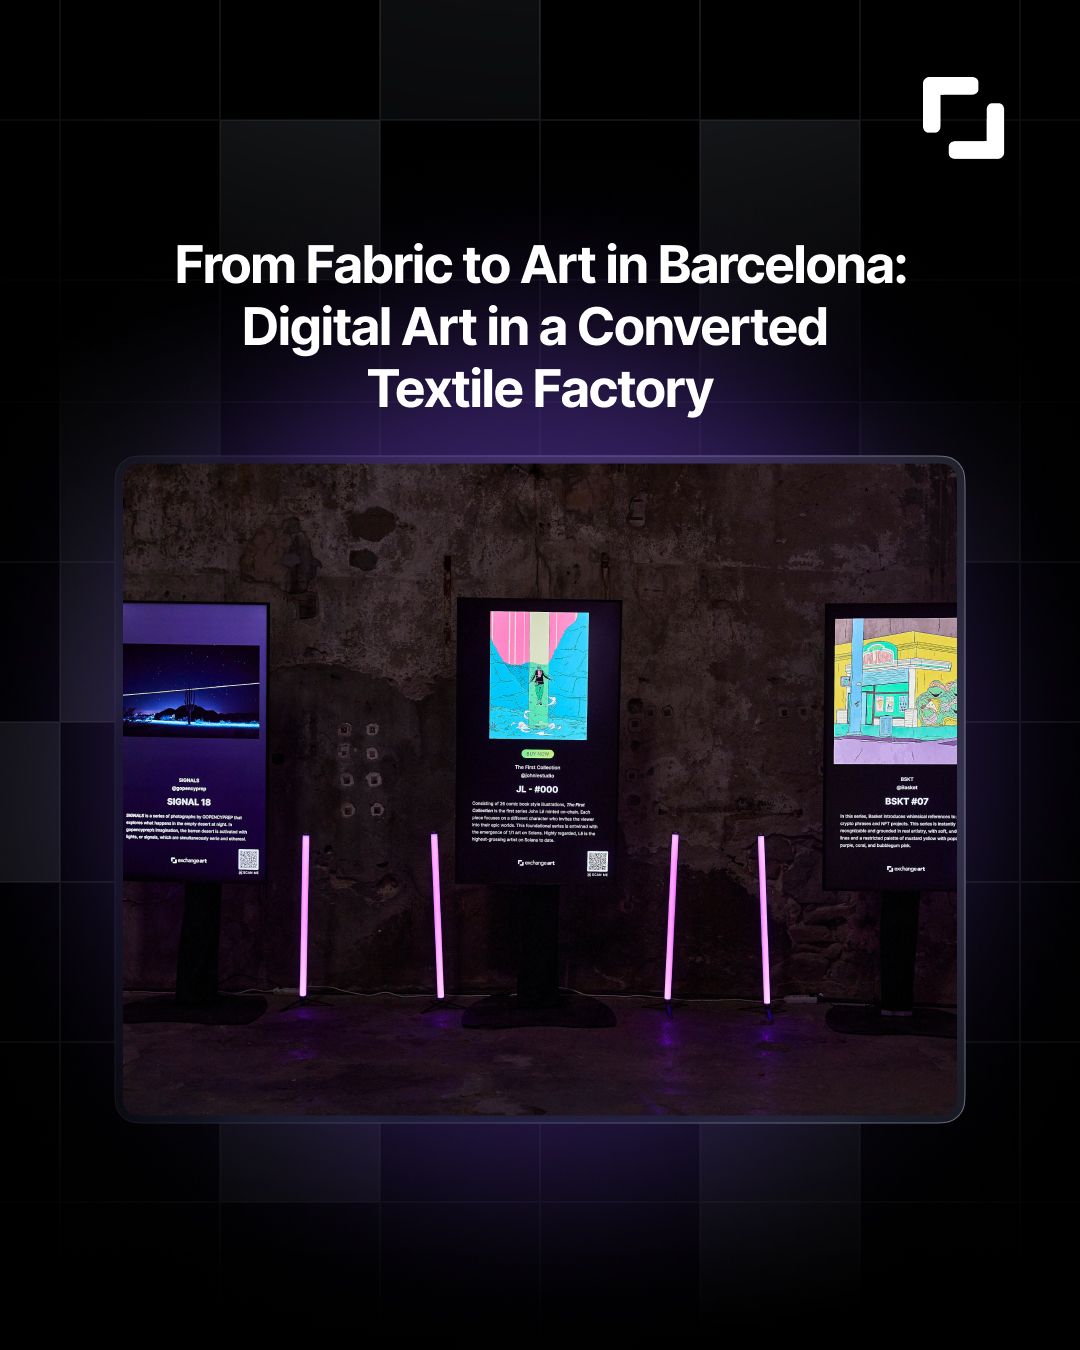 From Fabric to Art in Barcelona: Digital Art in a Converted Textile Factory